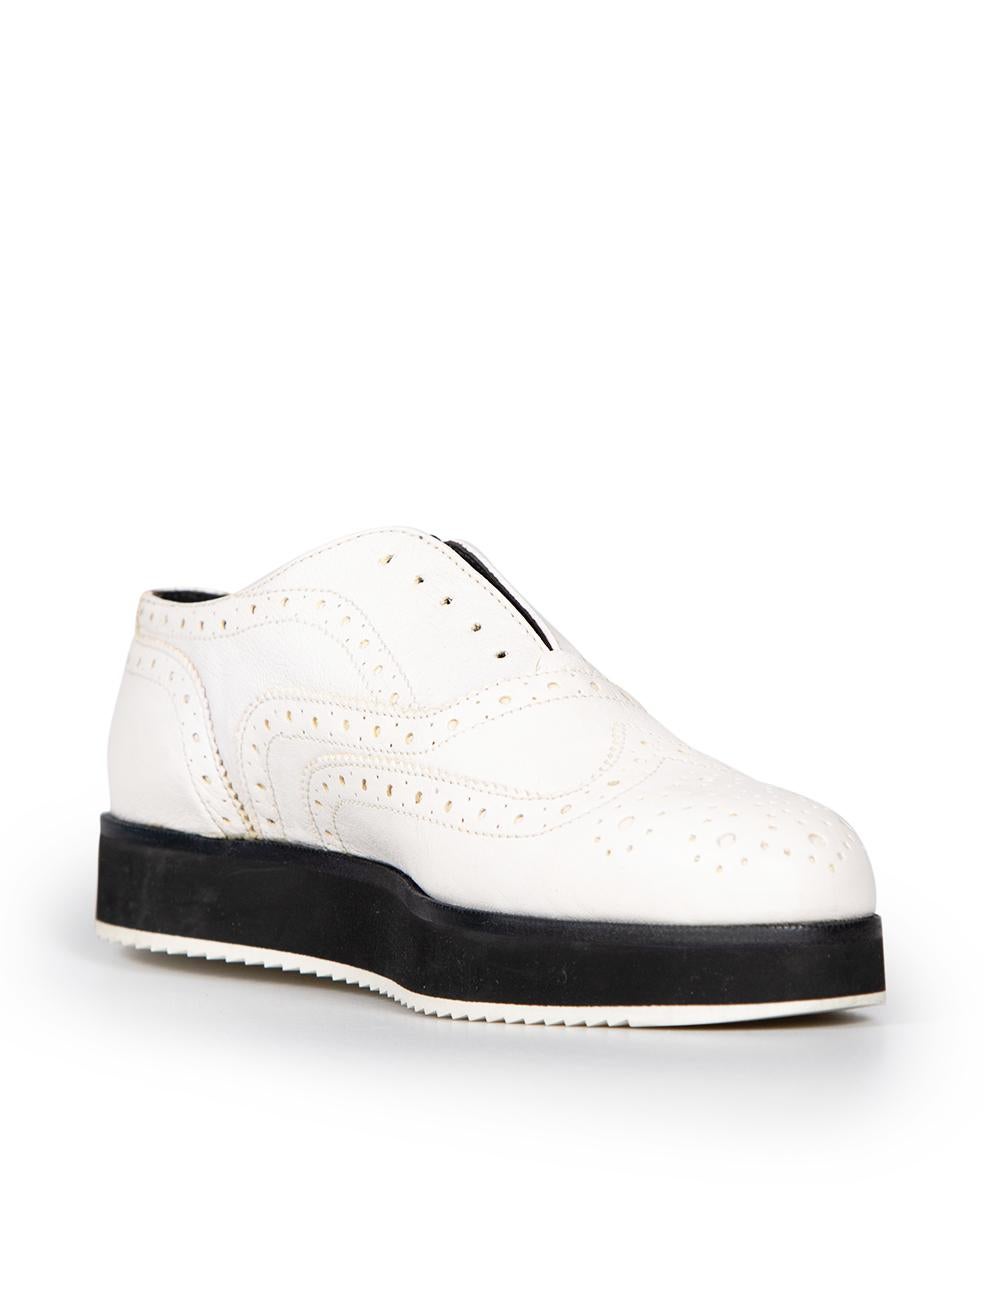 CONDITION is Very good. Minimal wear to shoes is evident. Minimal wear with general creasing to the leather on this used Rag & Bone designer resale item.
 
 
 
 Details
 
 
 White
 
 Leather
 
 Brogues
 
 Flatform
 
 Round toe
 
 Perforated detail
